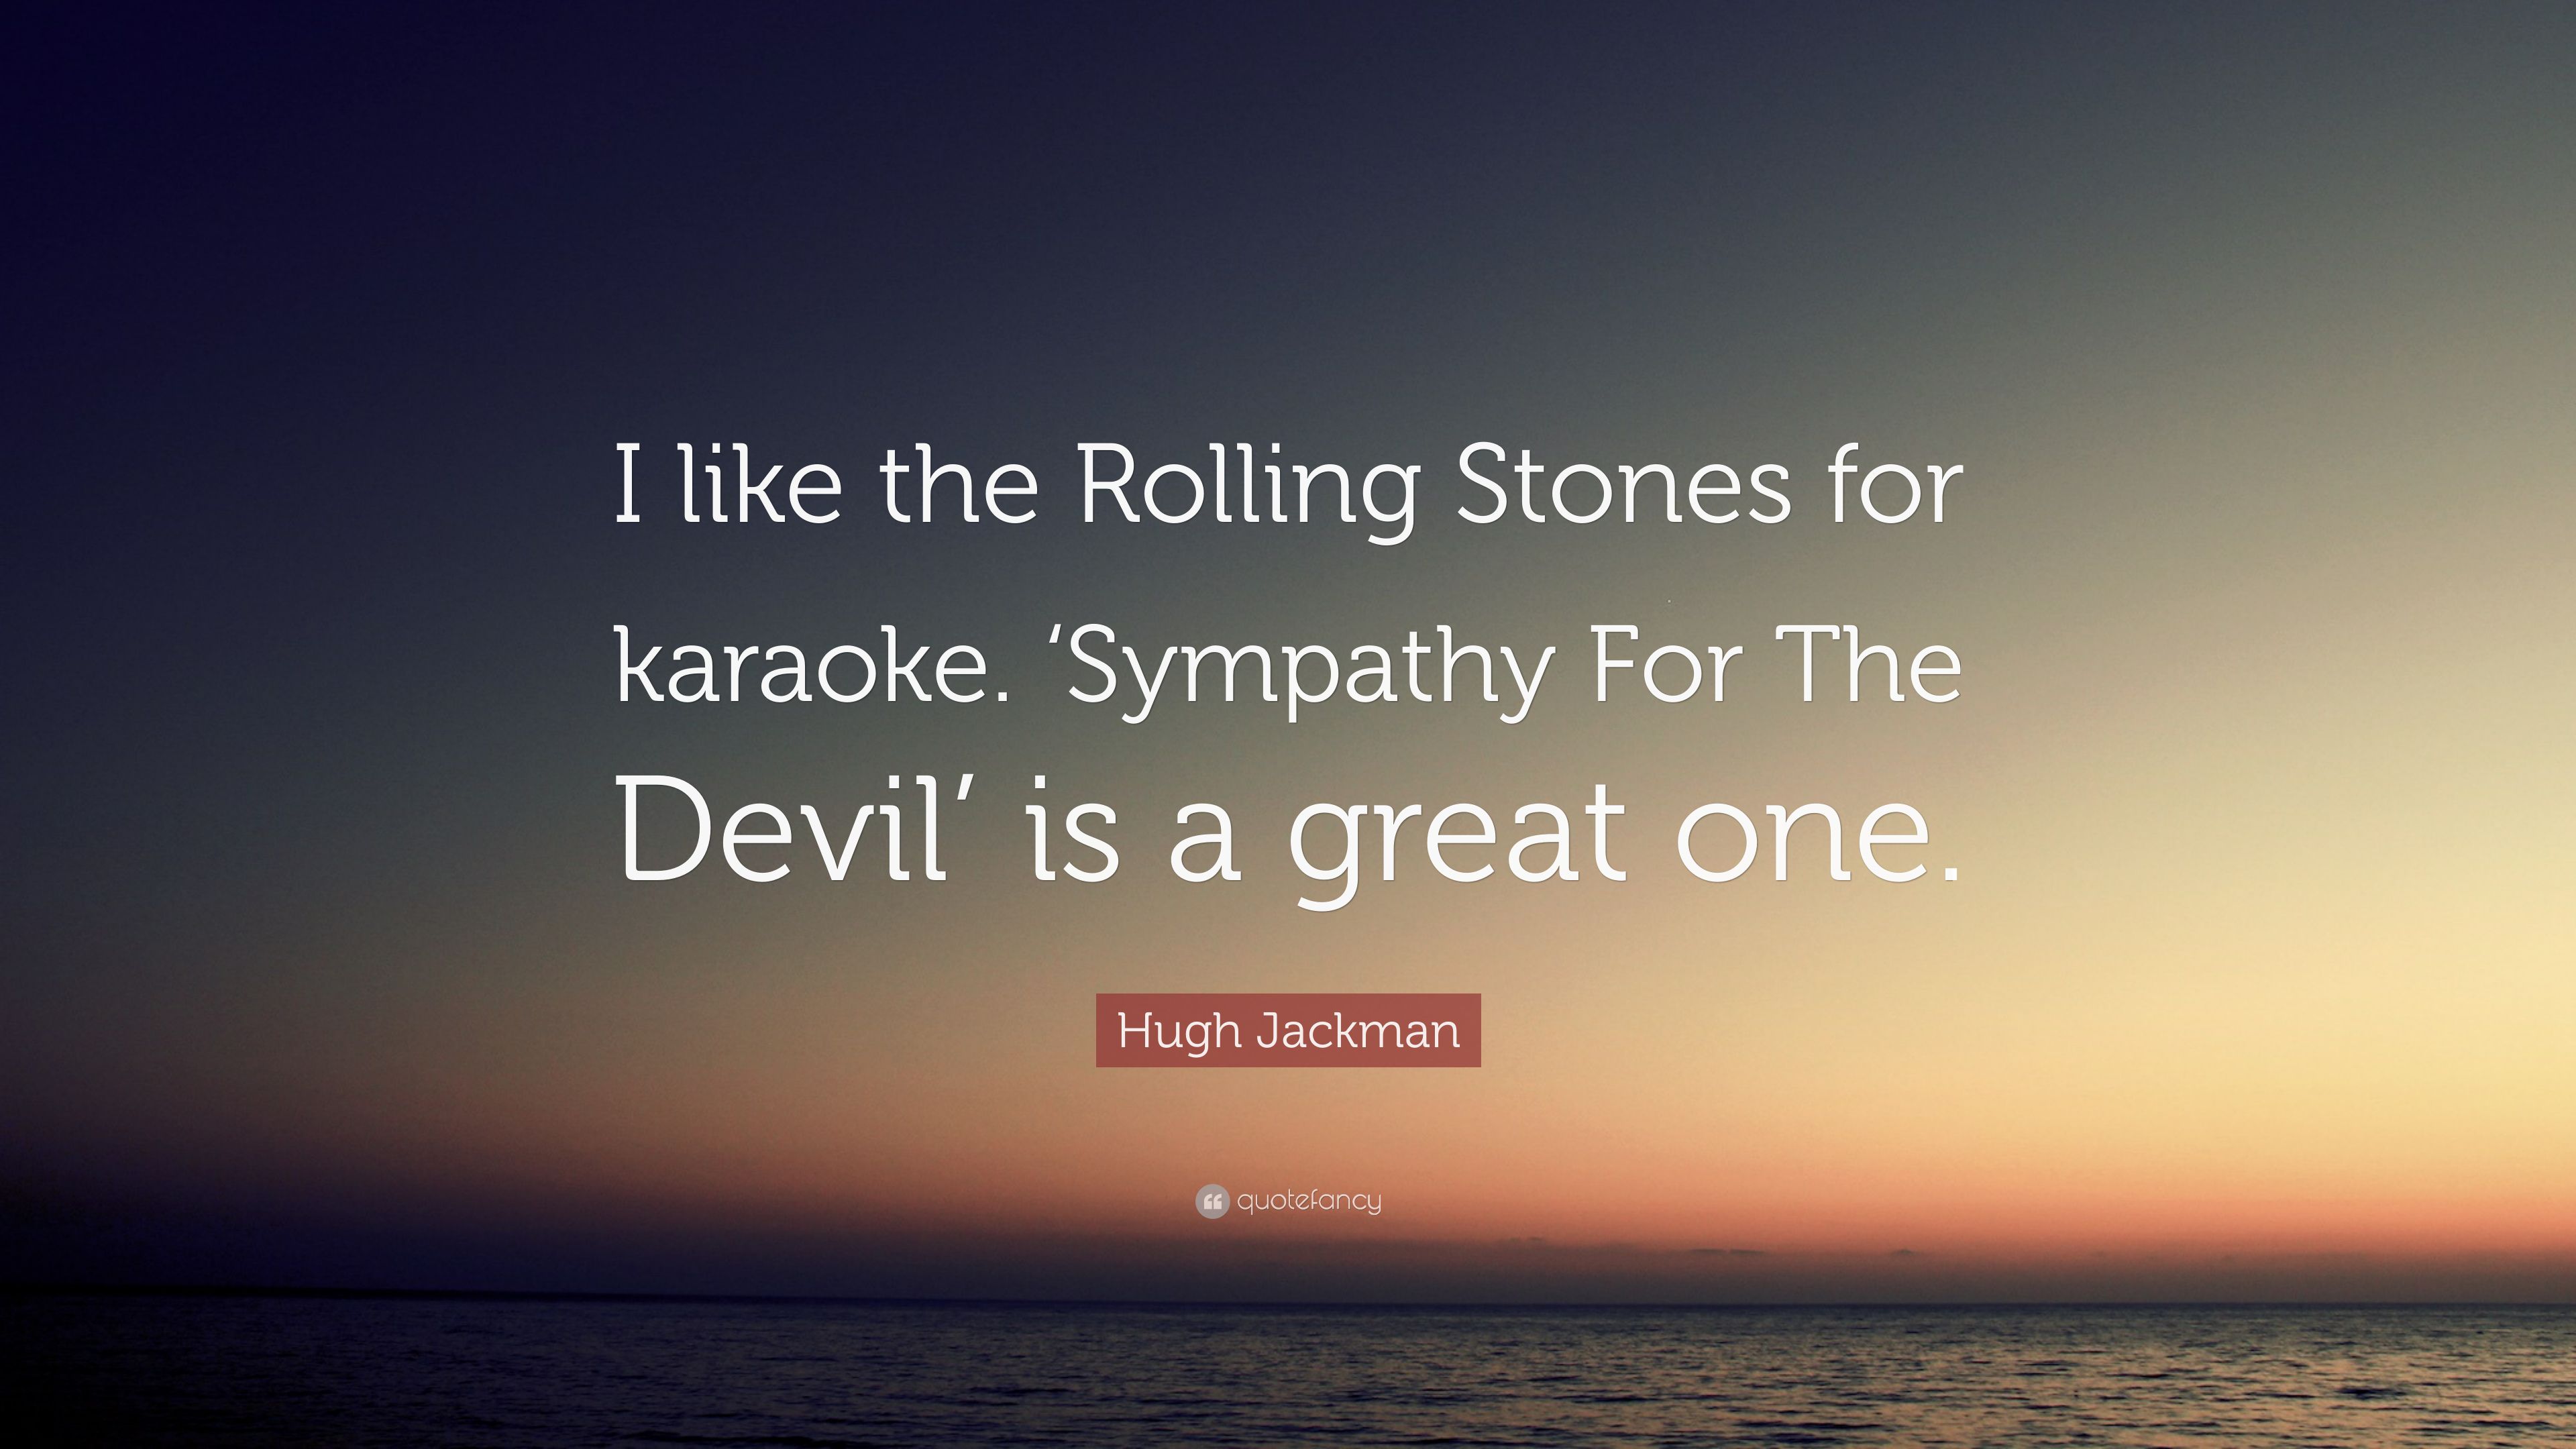 Hugh Jackman Quote: “I like the Rolling Stones for karaoke. 'Sympathy For The Devil' is a great one.” (7 wallpaper)